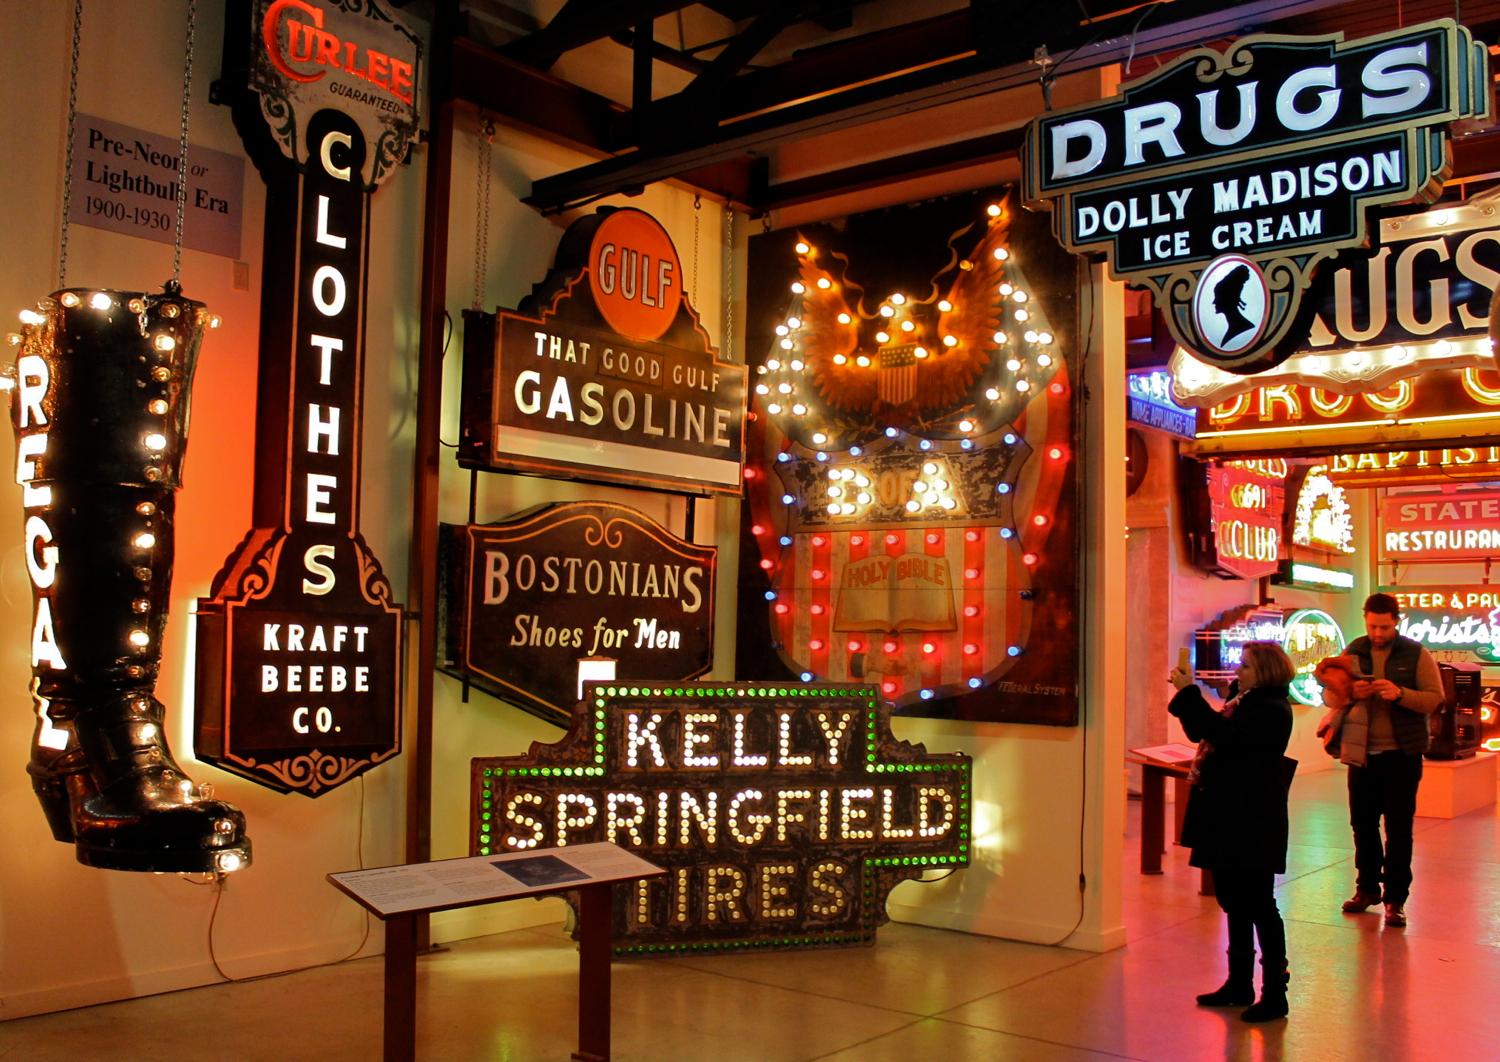 The American Sign Museum Just Jumped To The Top Of Our All-Time